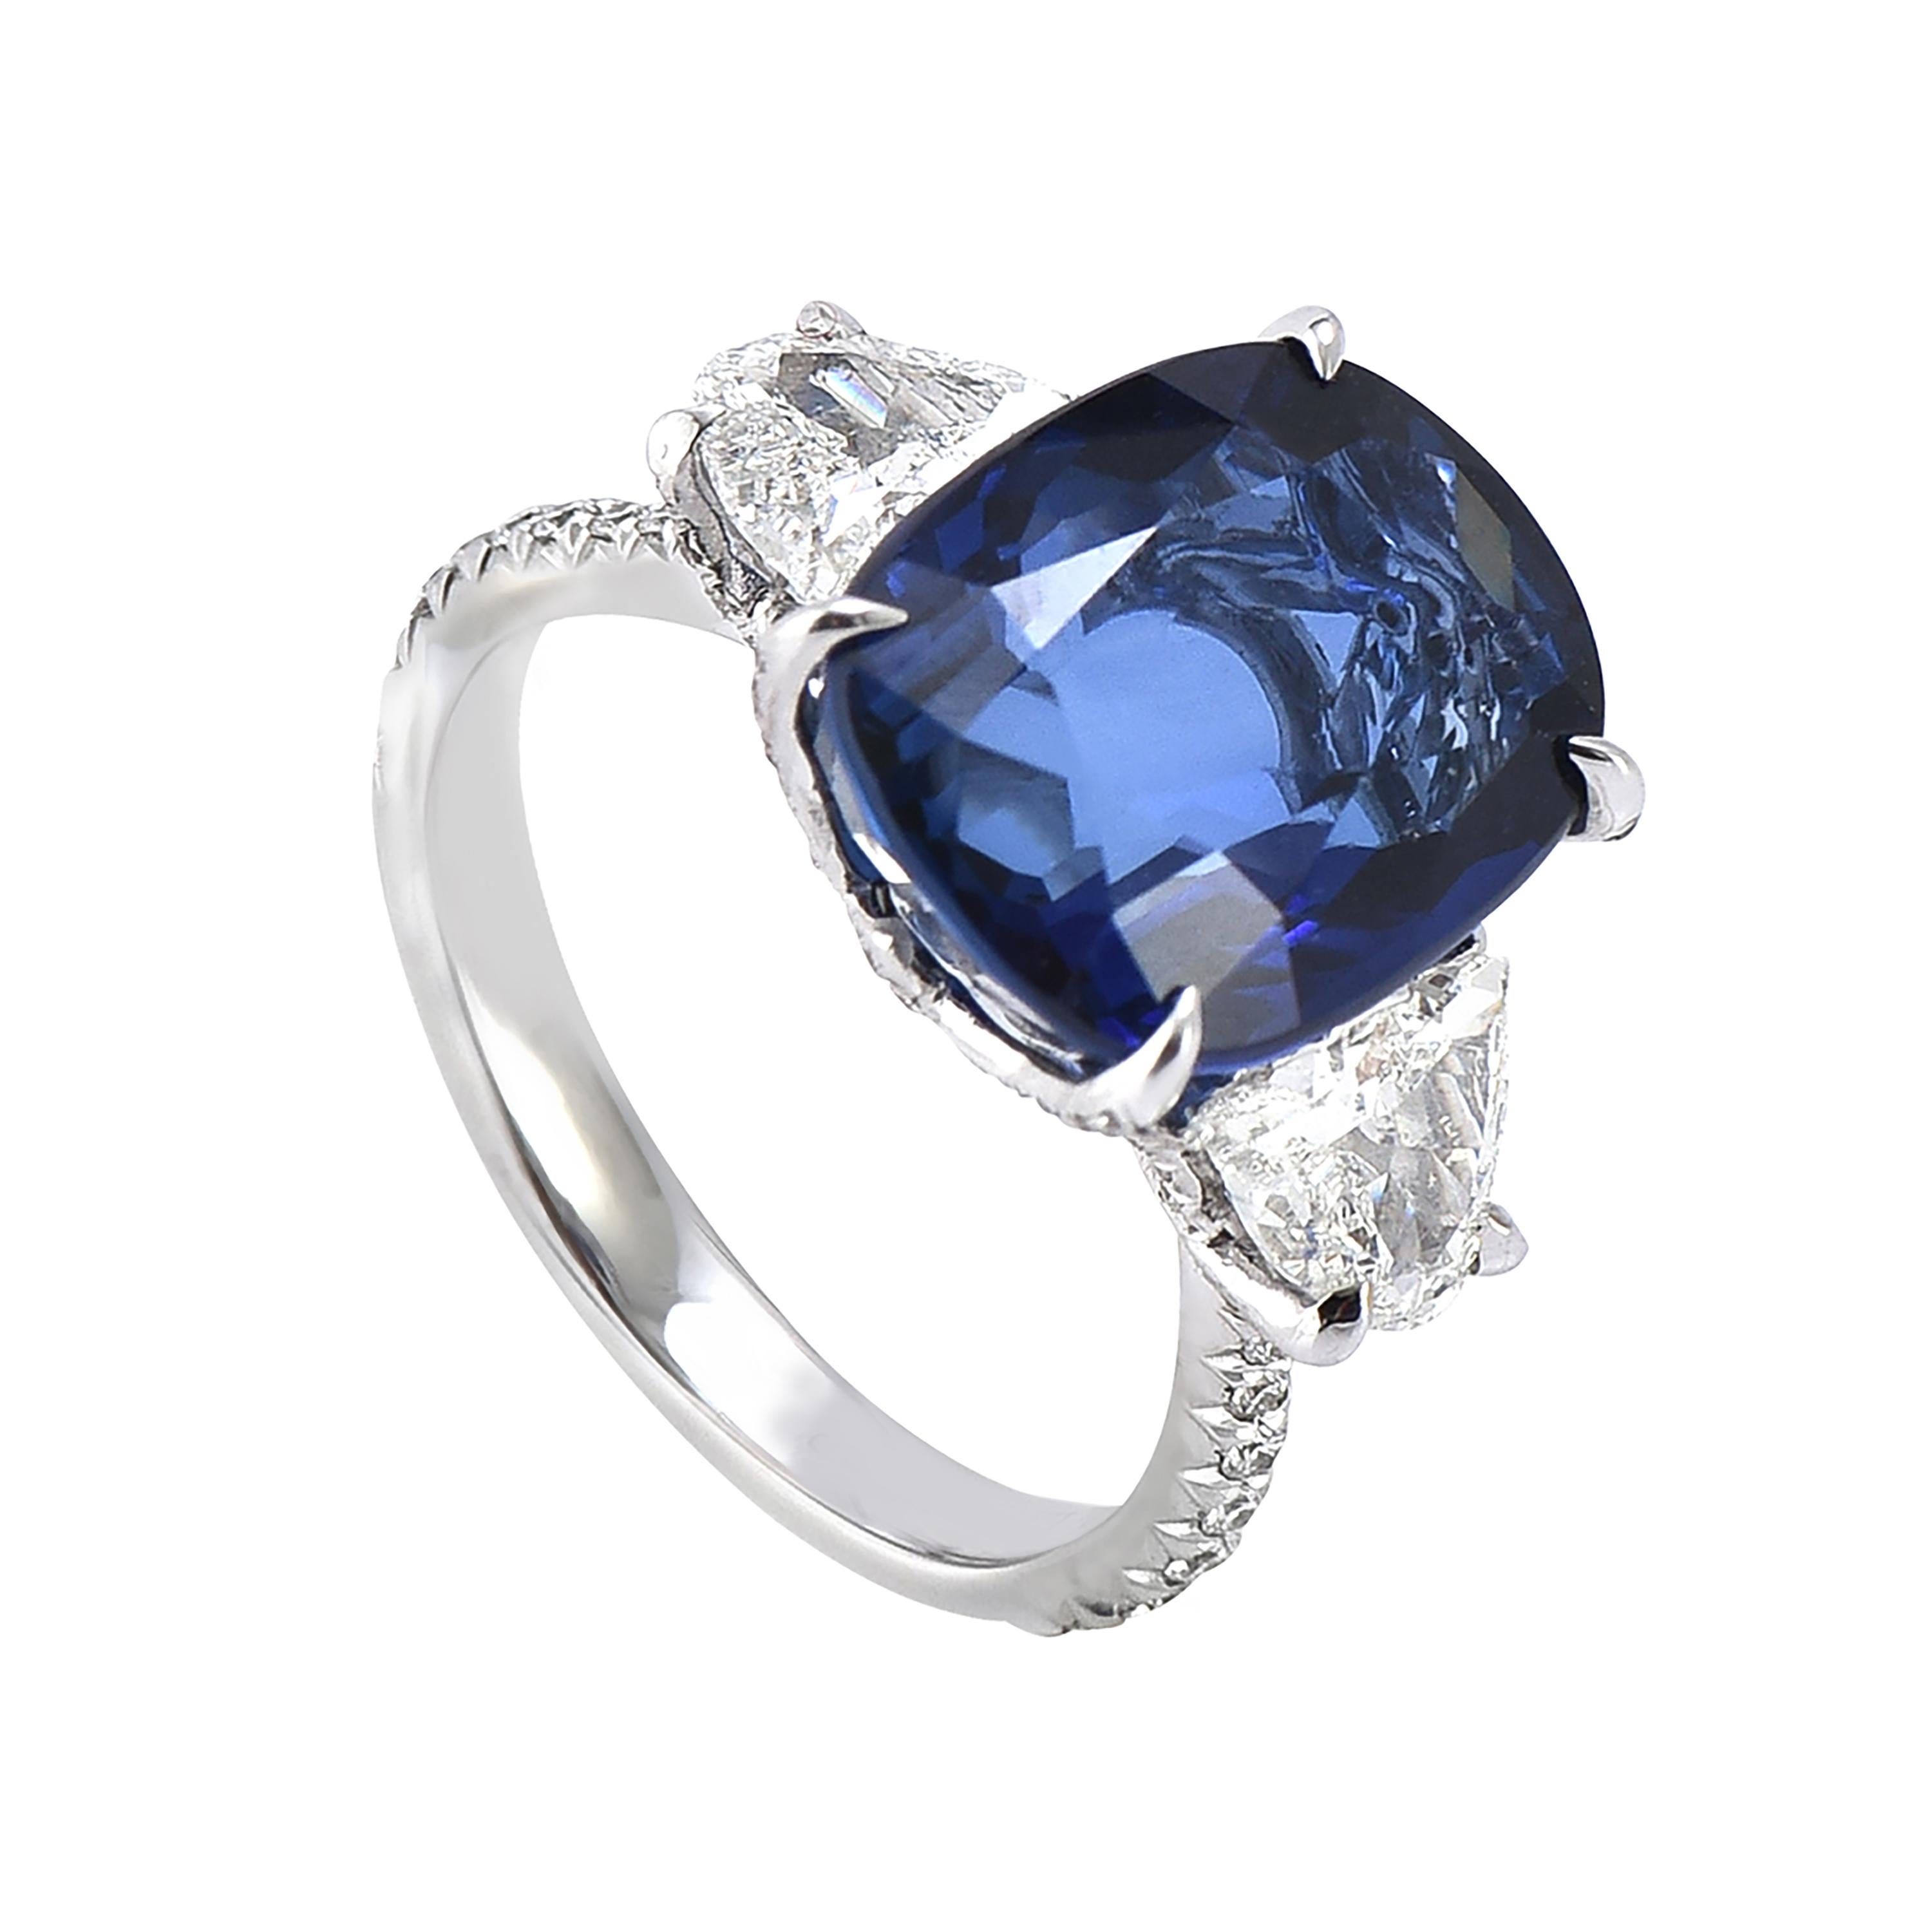 18 karat white gold blue sapphire ring from the Azure collection of Laviere. The ring is set with a GIA certified Sri Lankan 8.20 carats cushion-cut blue sapphire in the center, one carat half moon cut diamonds and 0.42 carats round brilliant